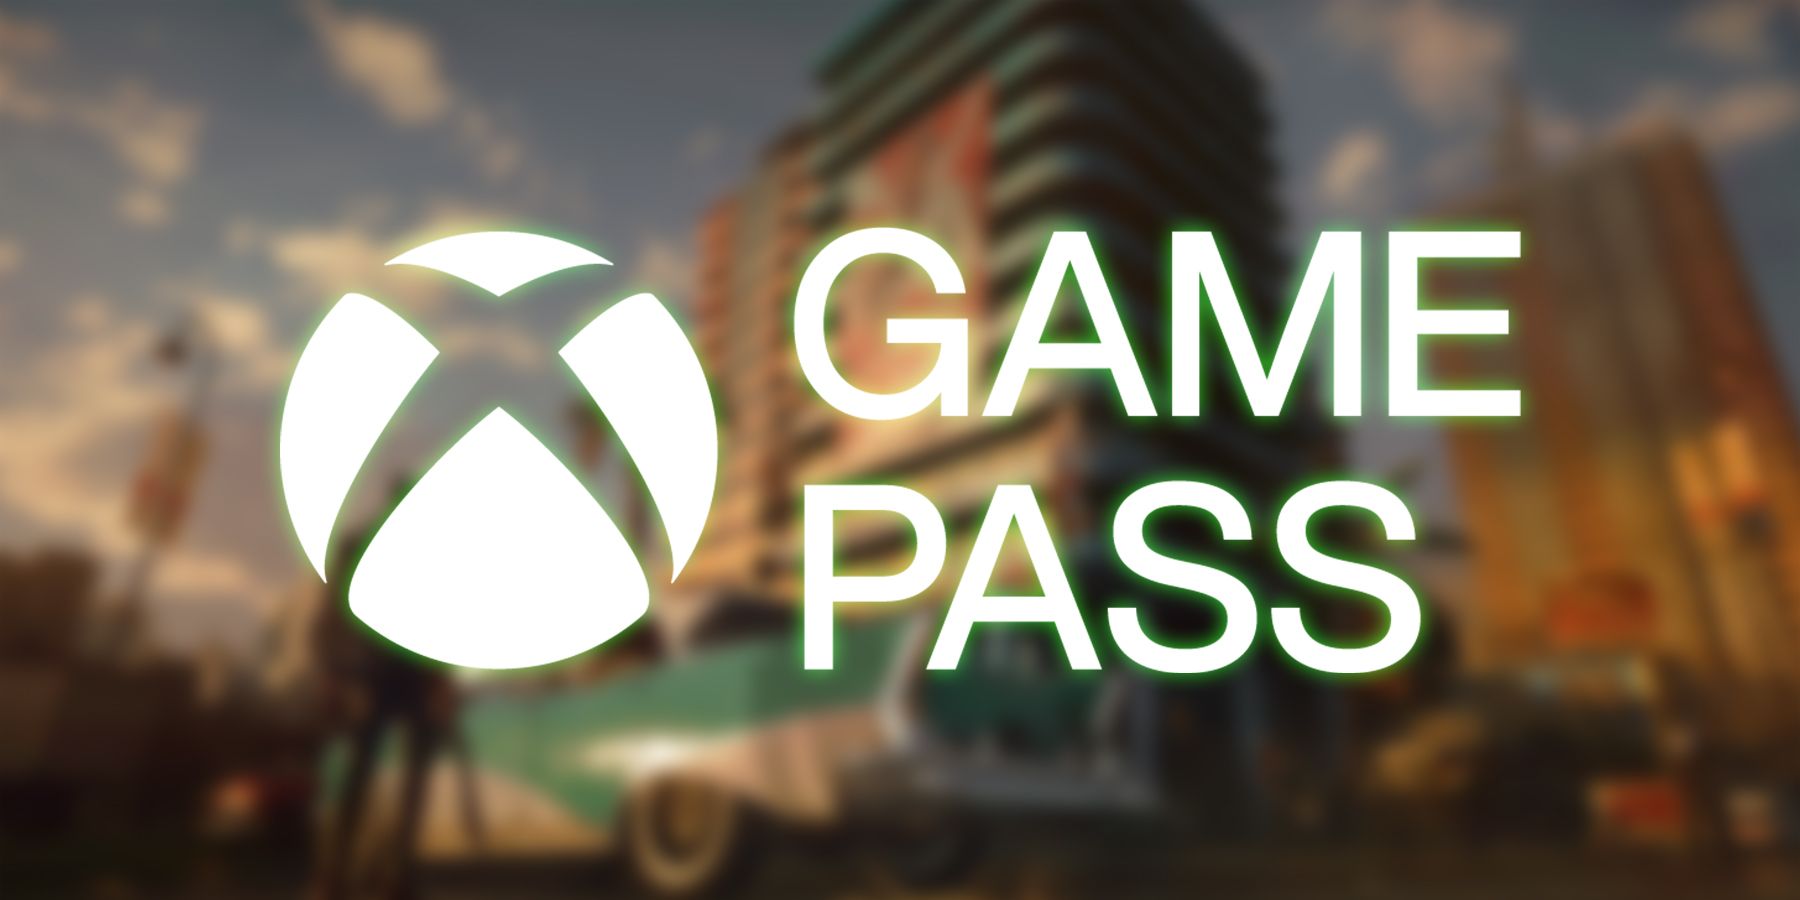 How long to beat Xbox Game Pass